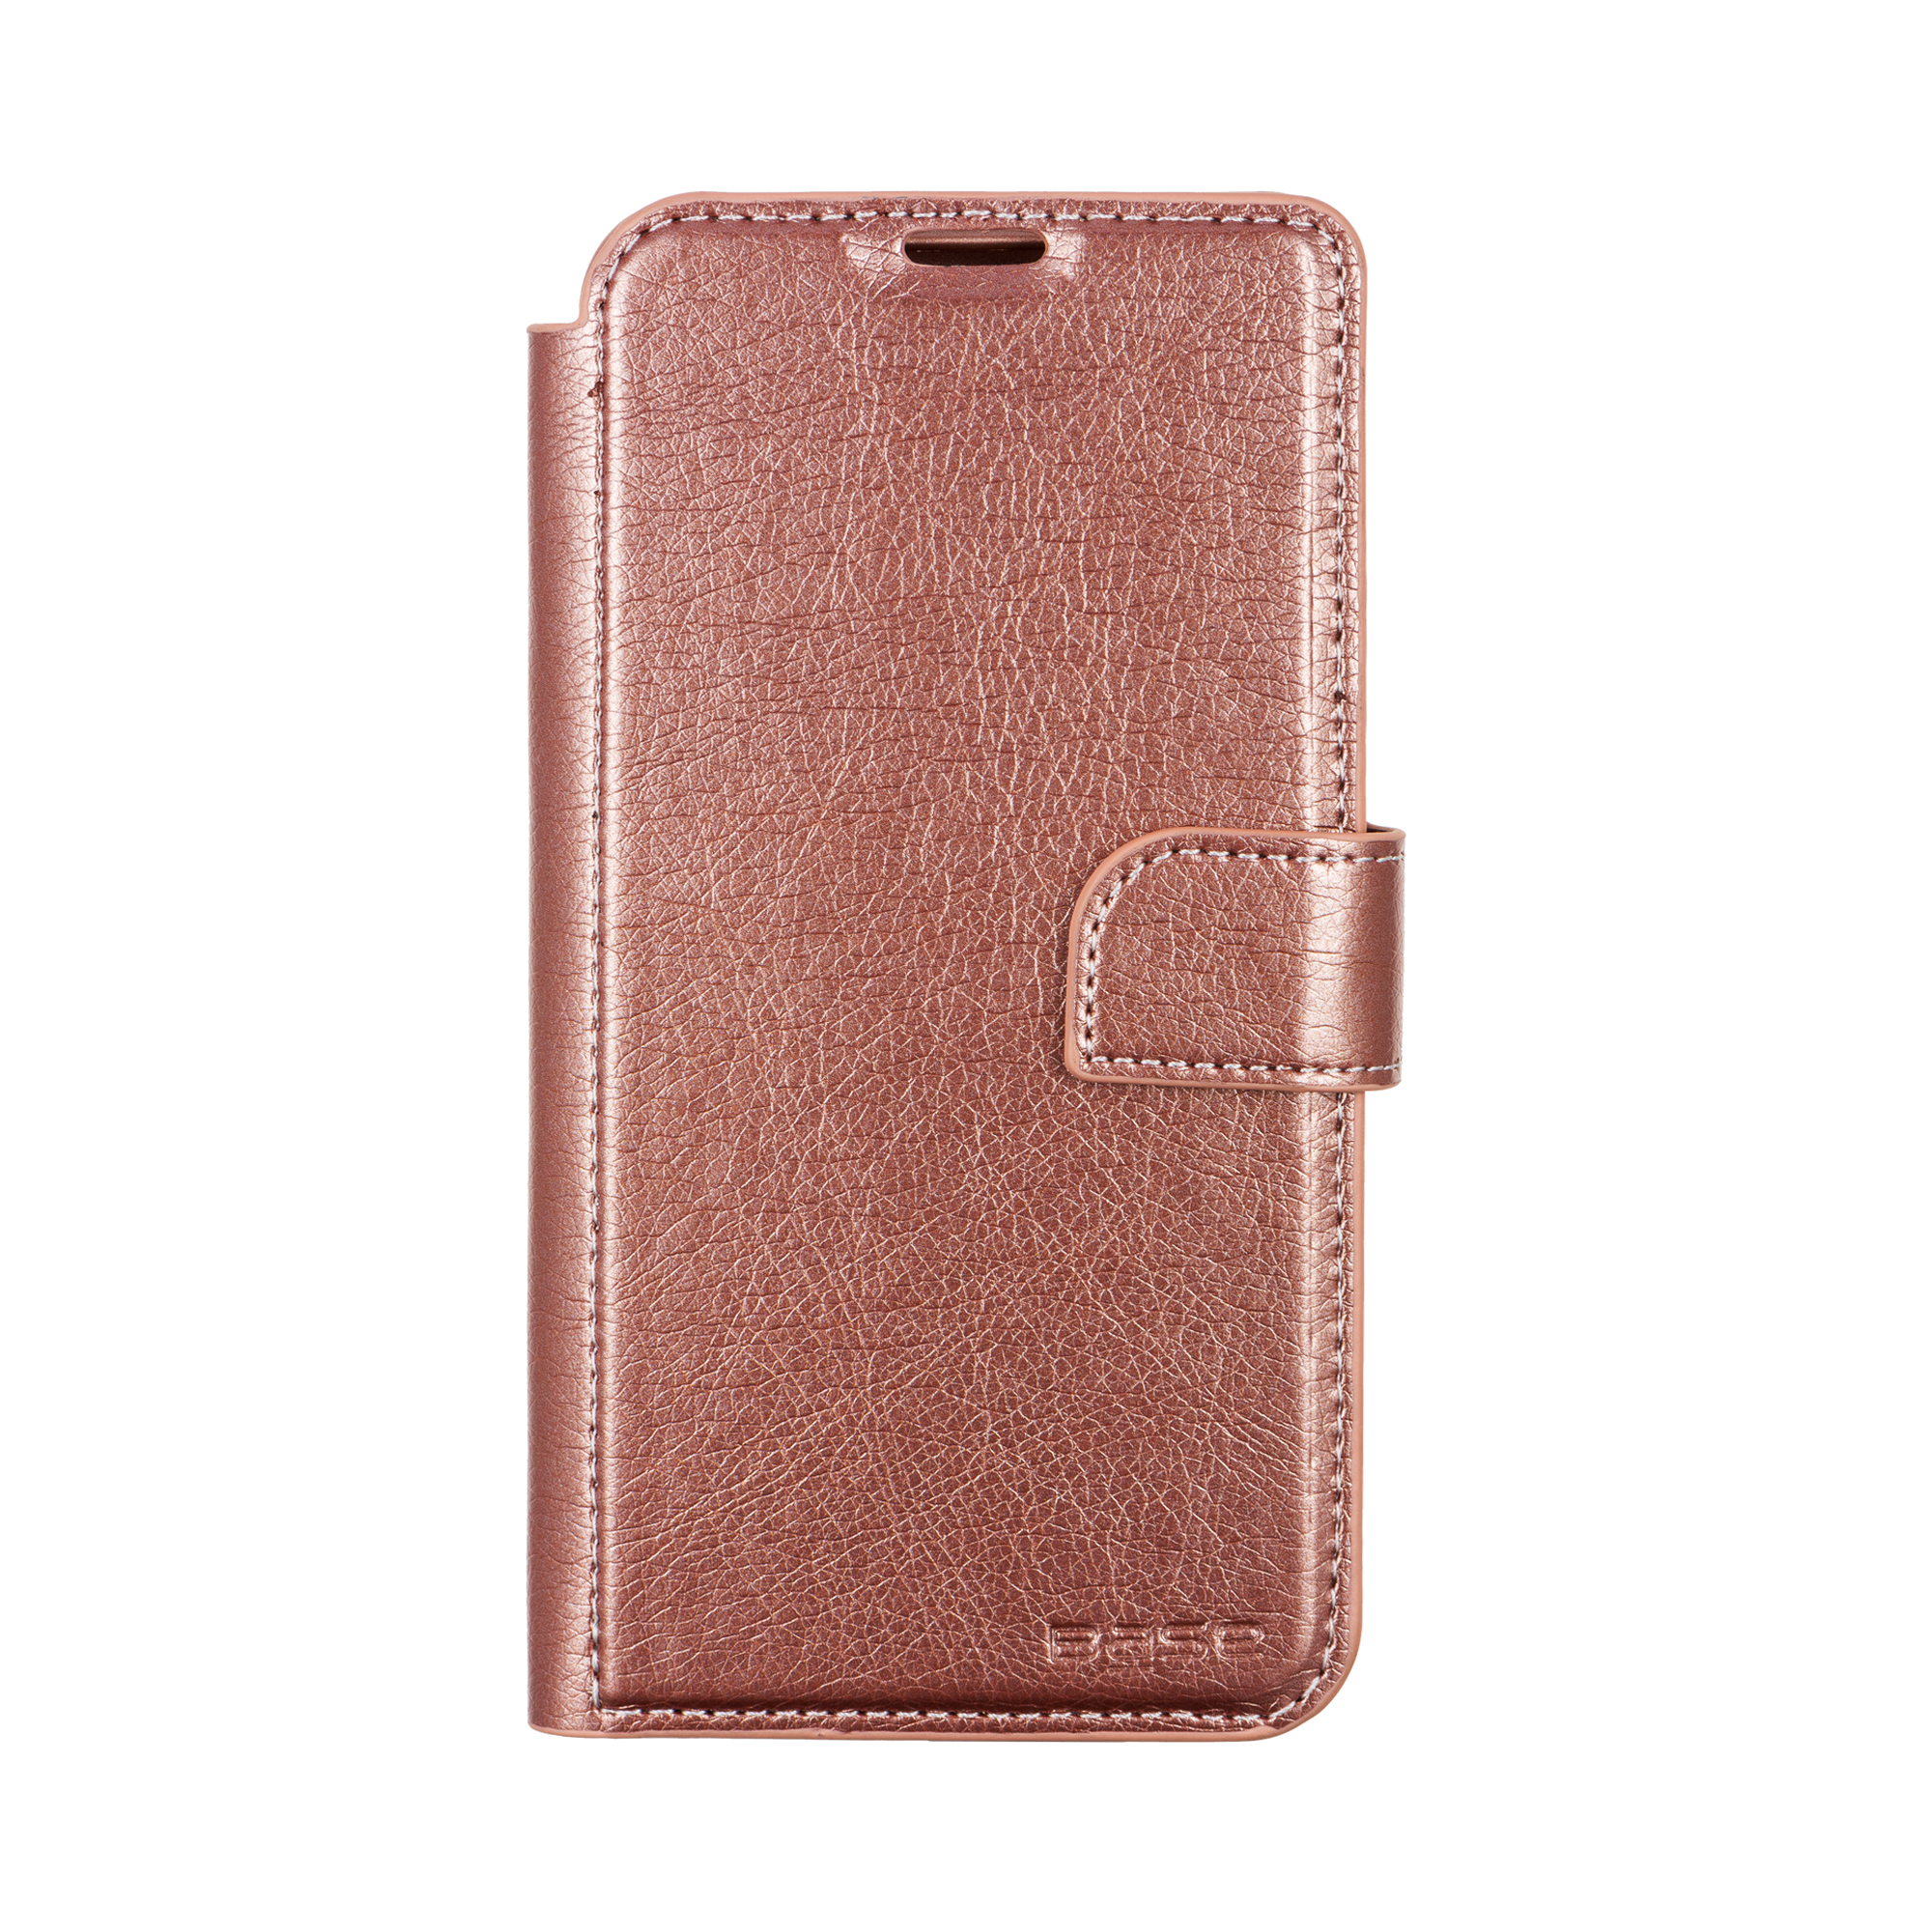 Rose Leather Wallet folio Case protector for iPhone 11 Pro Max cell phones